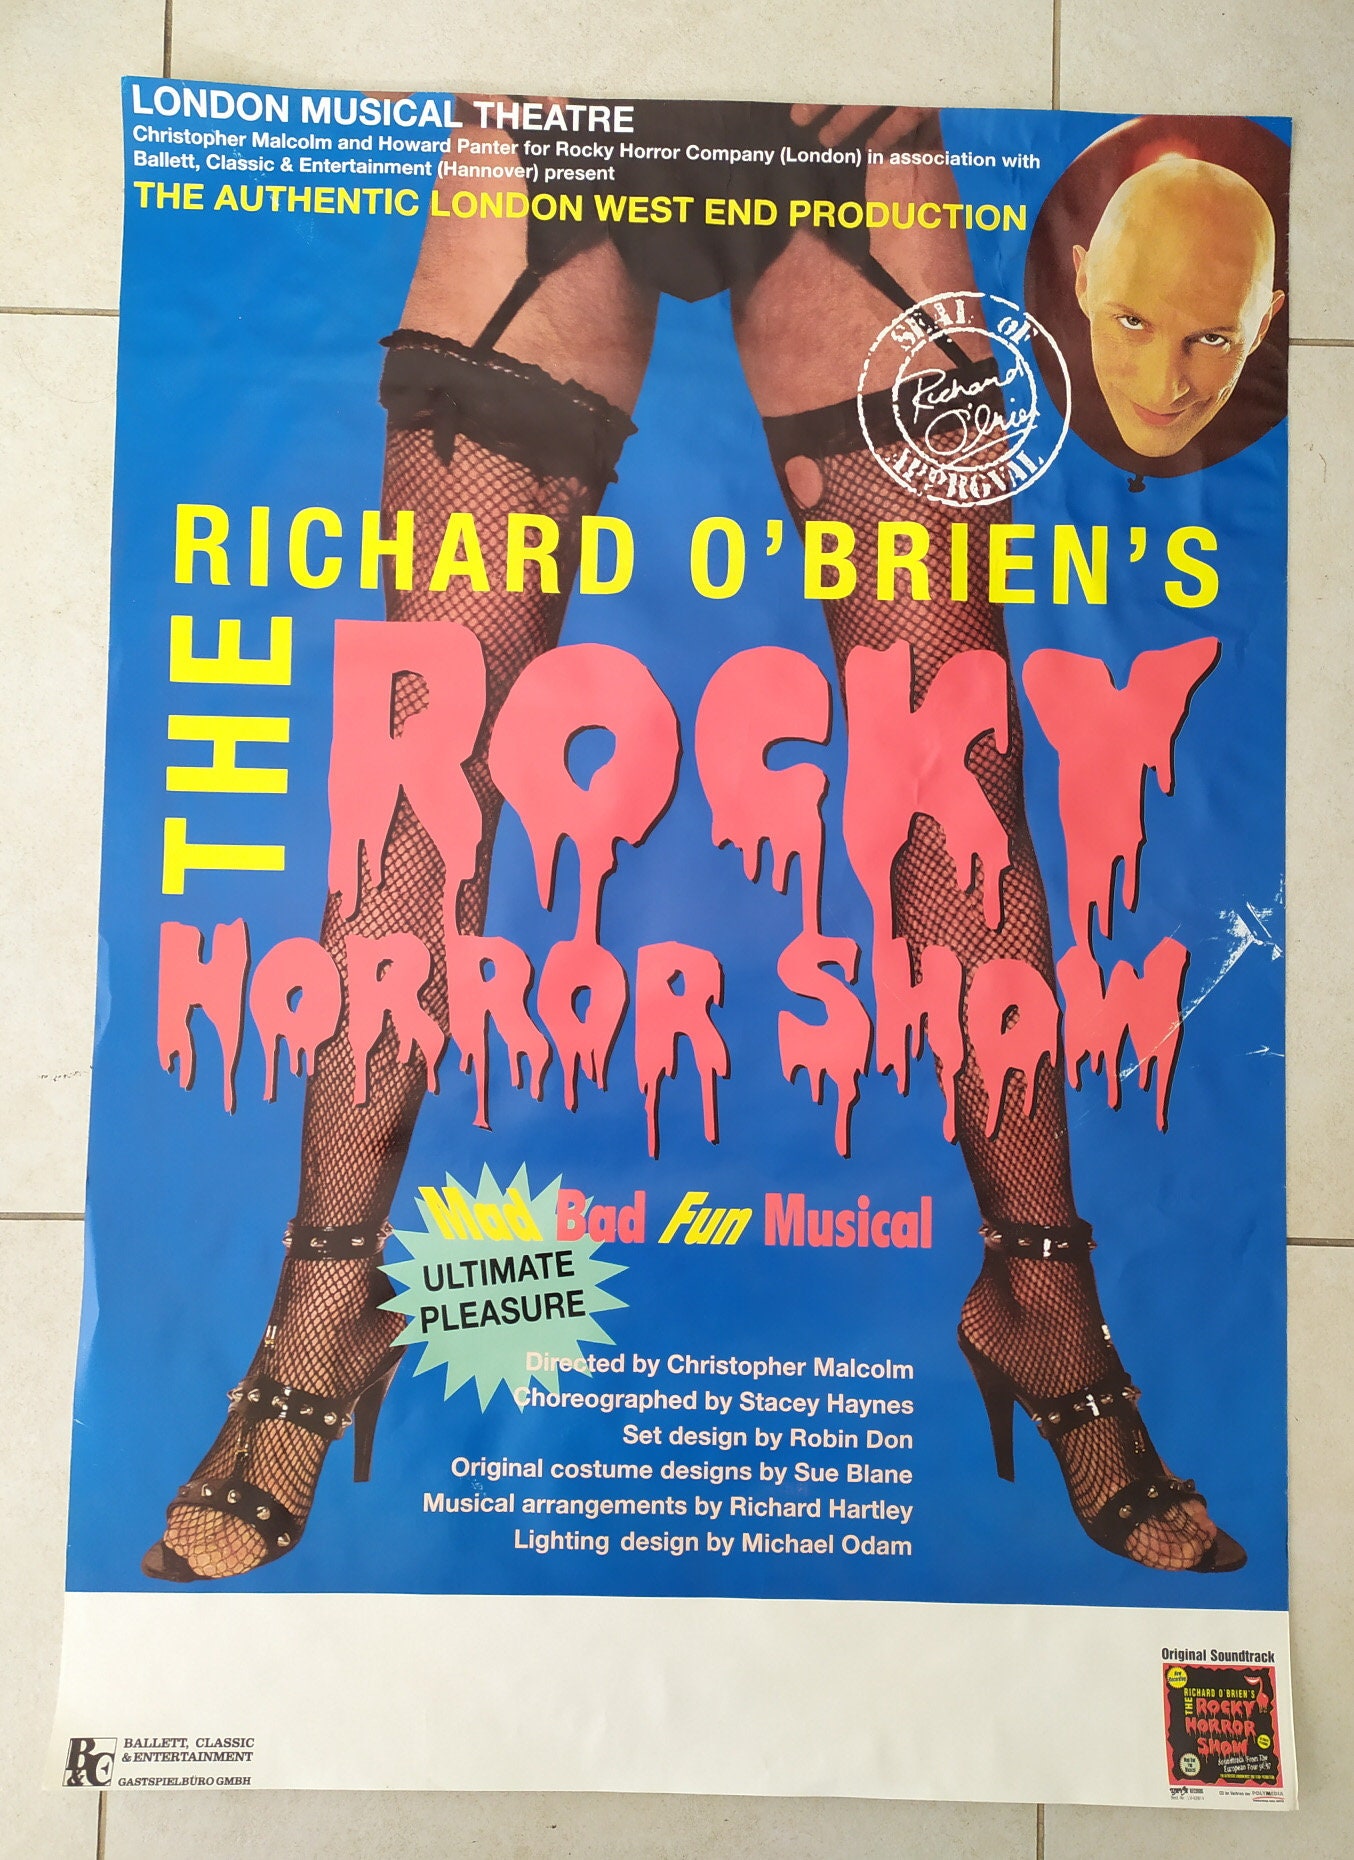 Richard O'Brien's THE ROCKY HORROR PICTURE SHOW